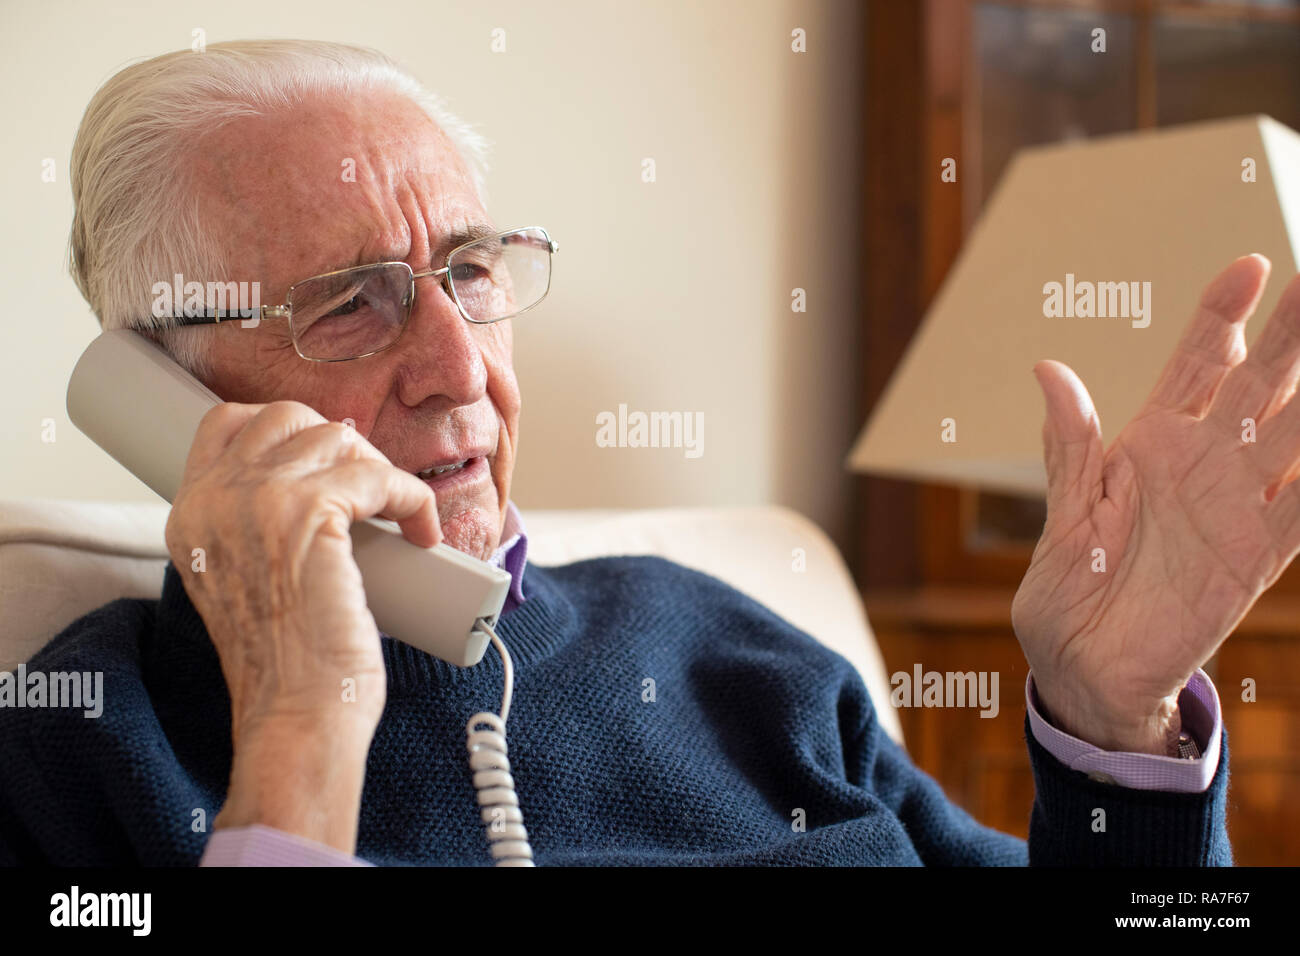 Senior Man Receiving Unwanted Telephone Call At Home Stock Photo